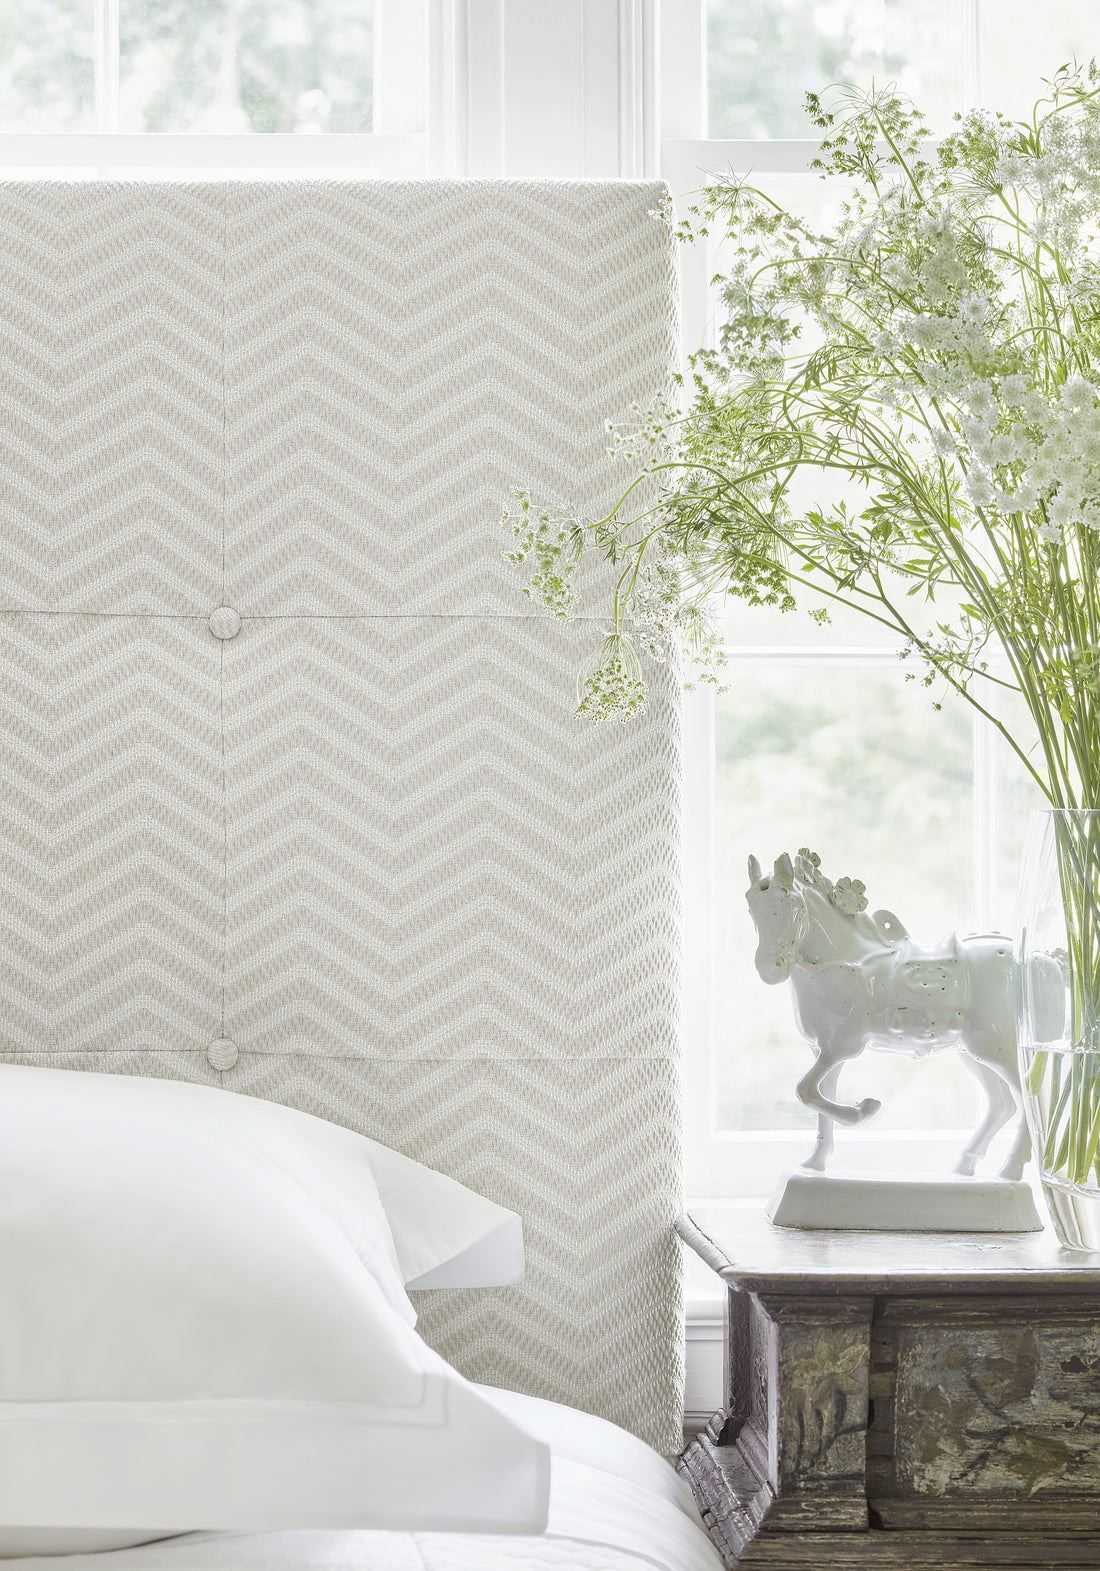 Detailed view of Sonoma Headboard in Matari Chevron woven fabric in almond color variant by Thibaut in the Pinnacle collection - pattern number W80631